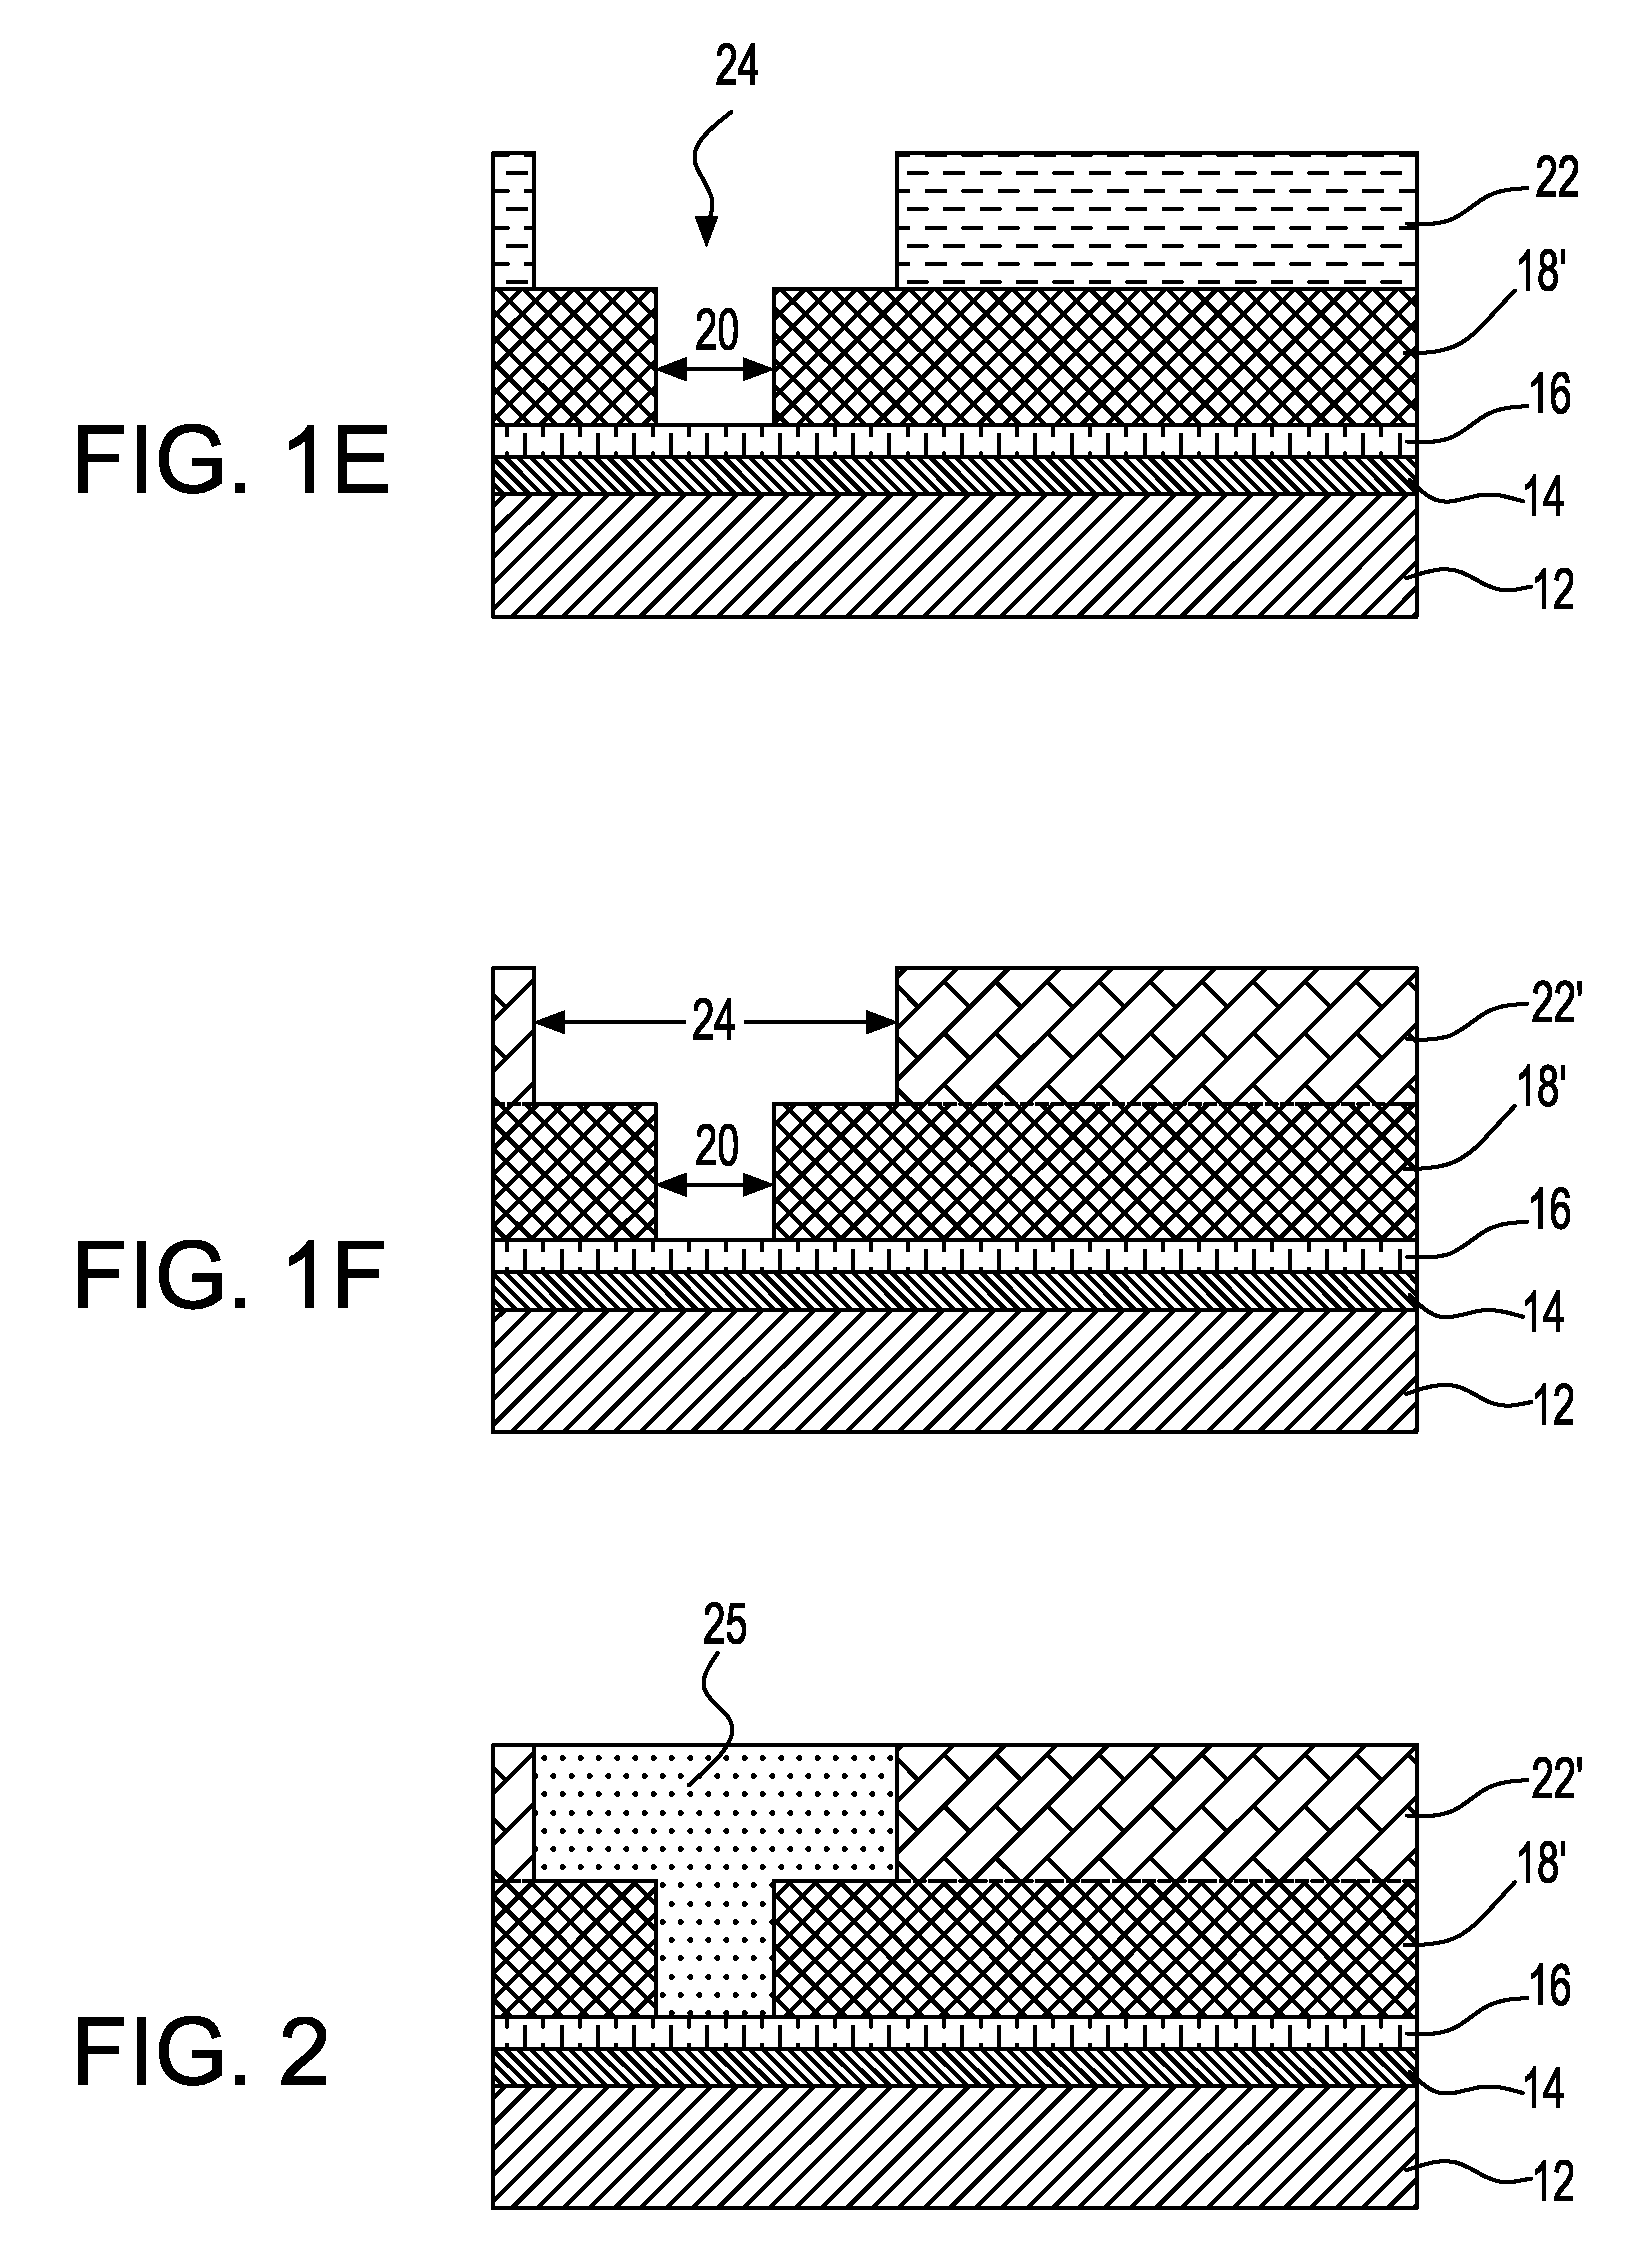 Interconnect structures with patternable low-k dielectrics and method of fabricating same